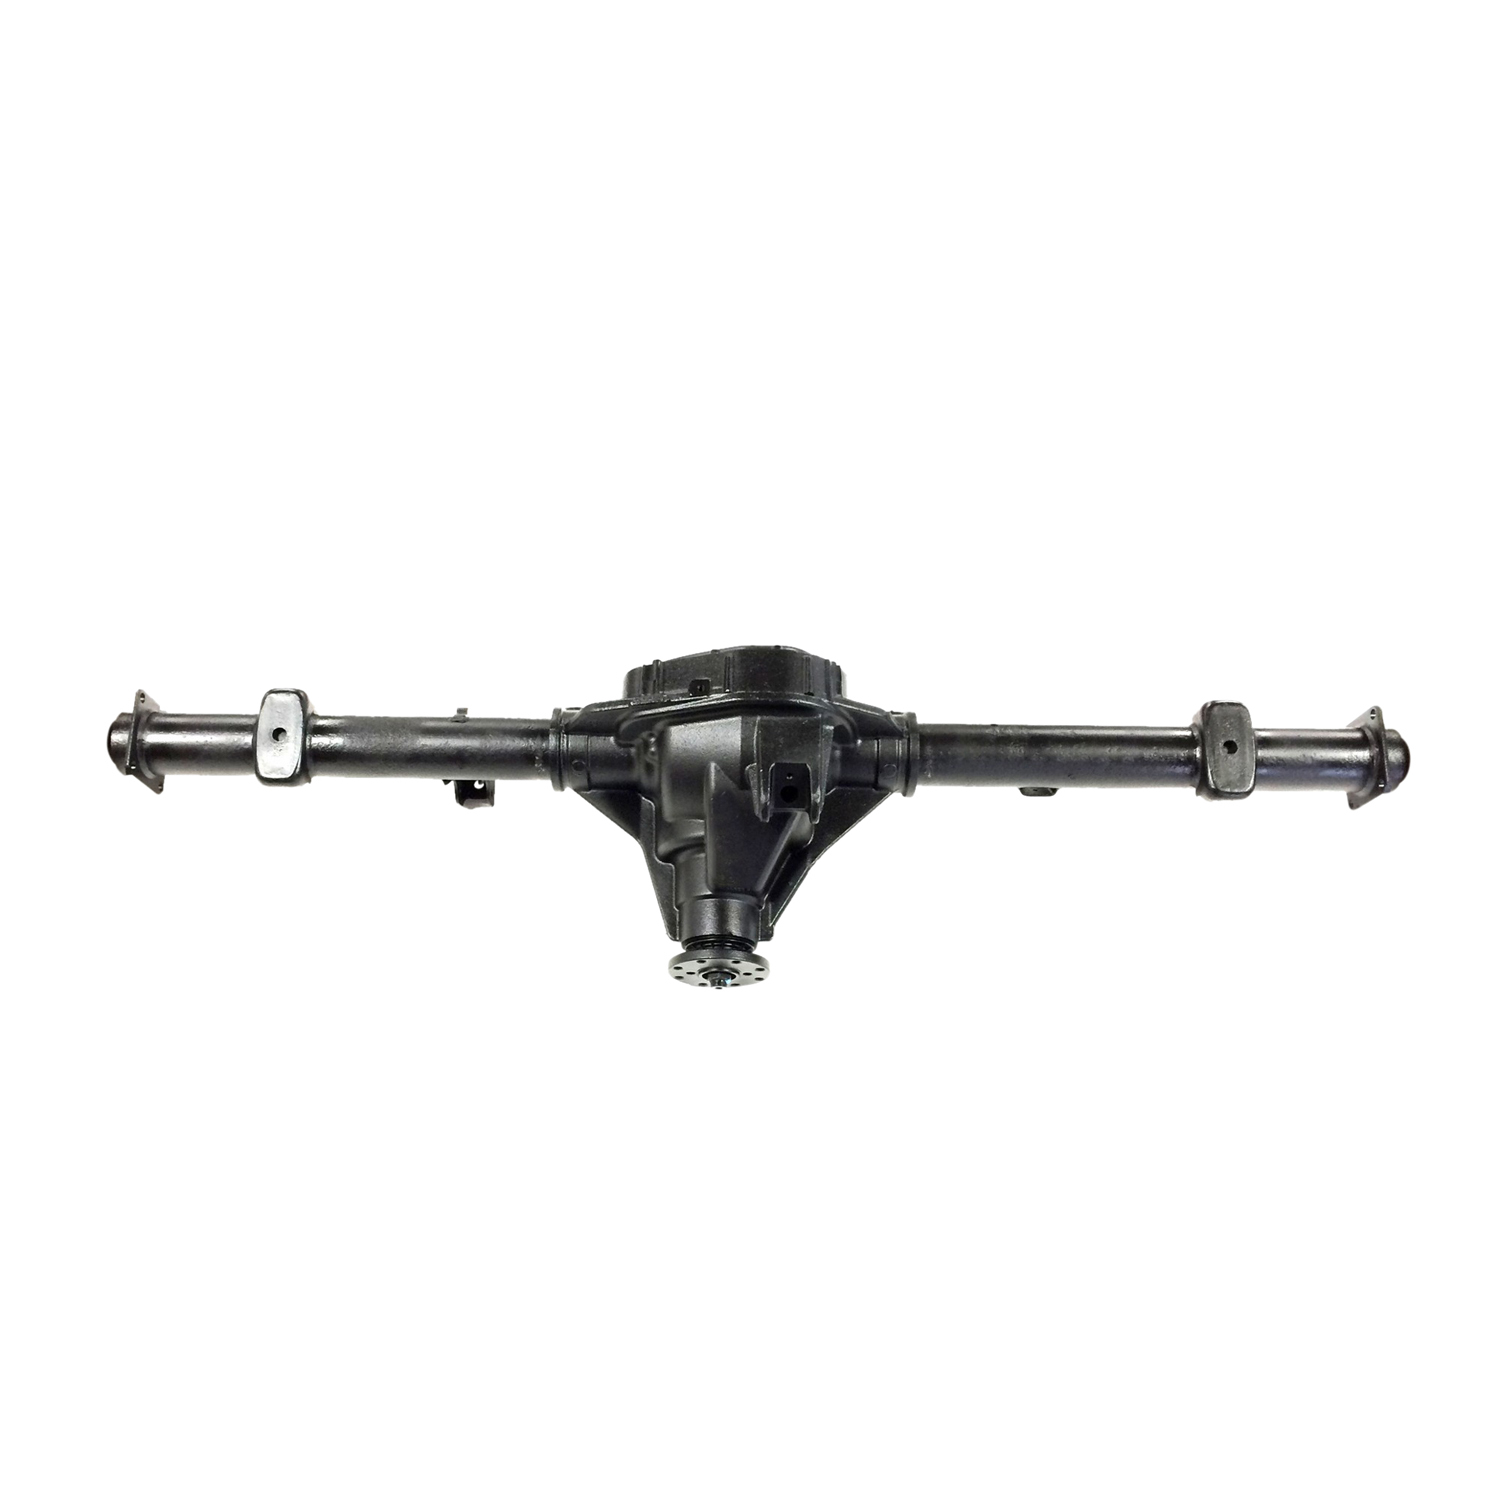 Remanufactured Axle 9.75" 2000 F150 3.55 Rear Drum, Stepped Housing, Posi *Check Tag*